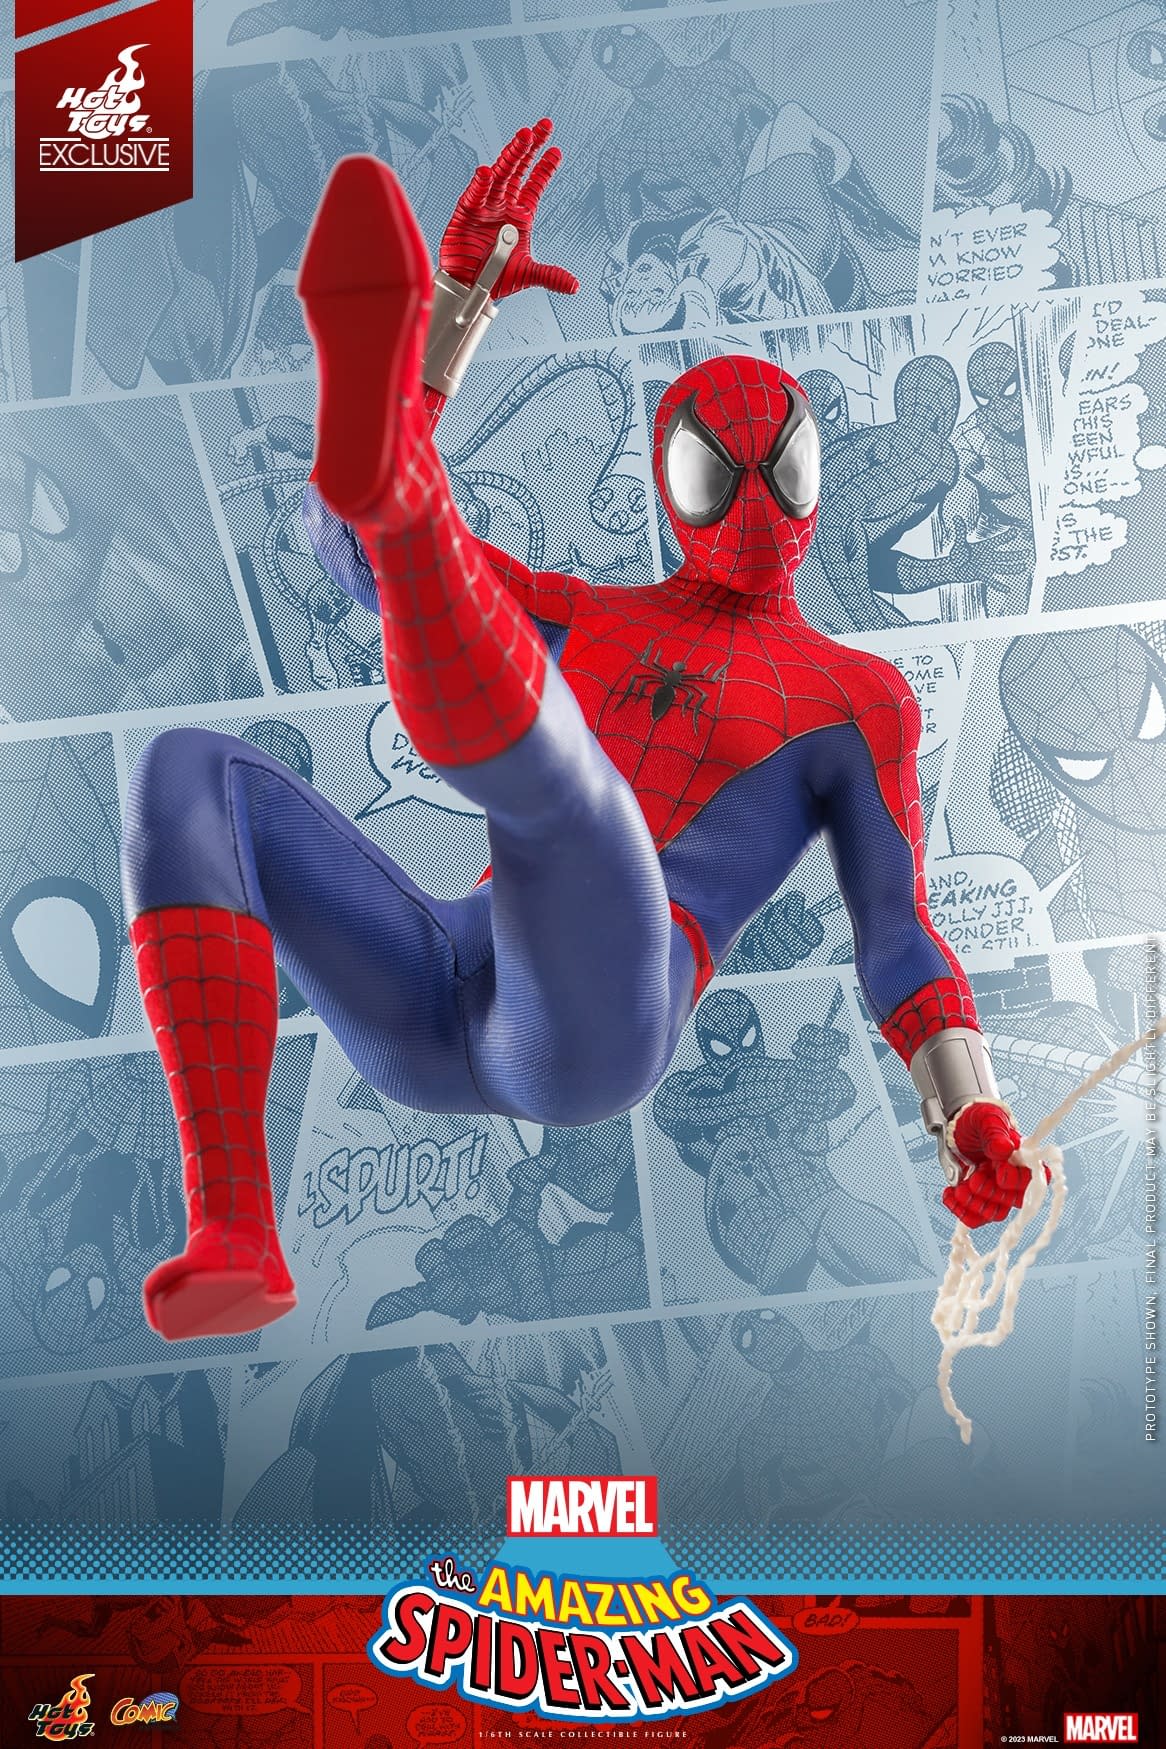 Spider-Man Receives Exclusive Marvel Comics 1/6 Figure from Hot Toys4